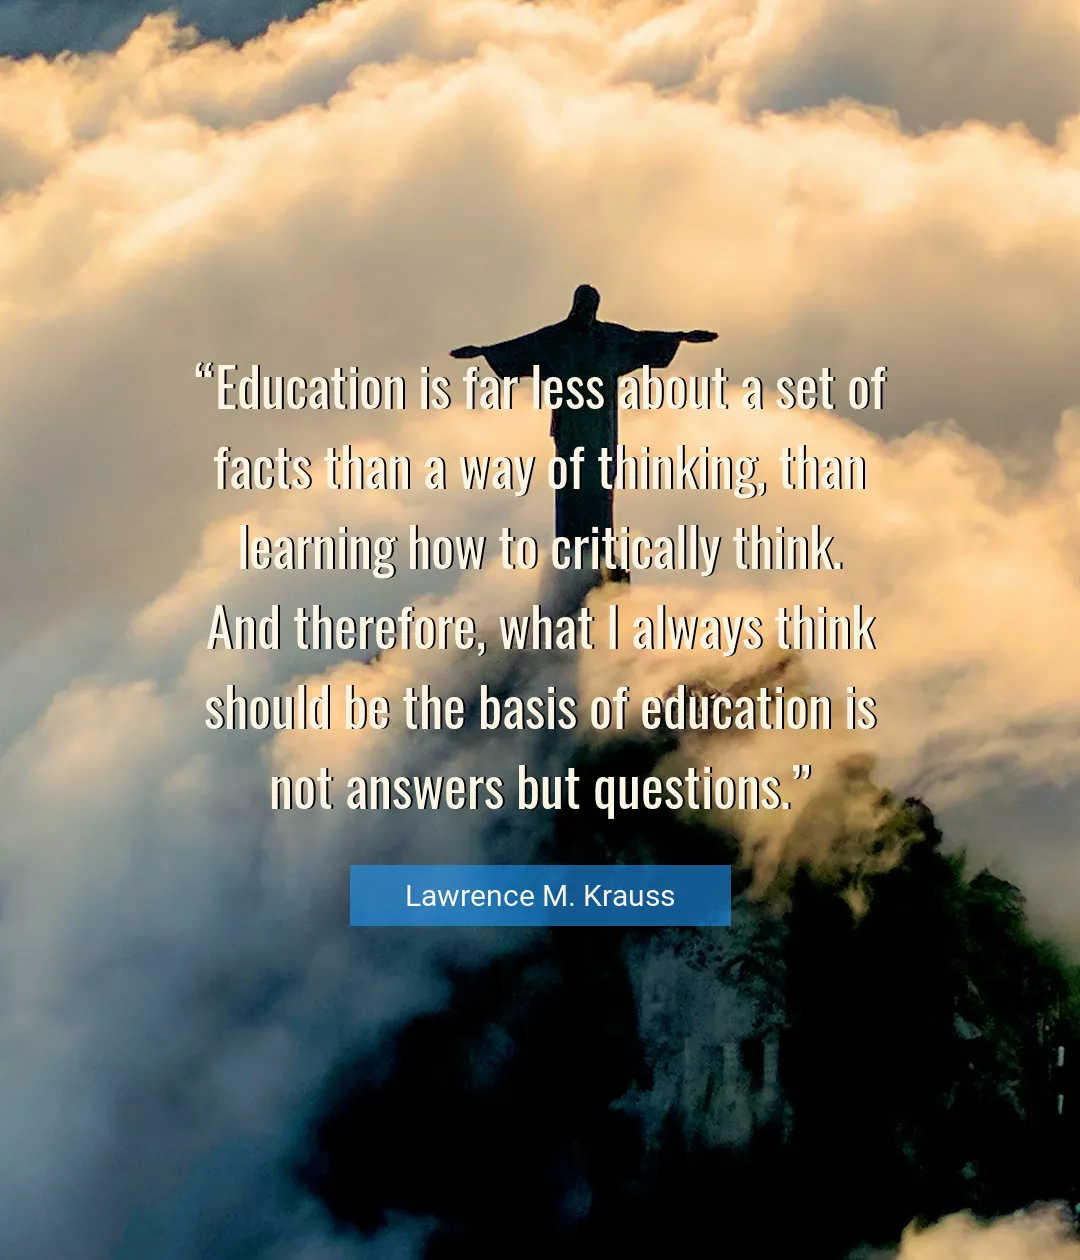 Quote About Education By Lawrence M. Krauss